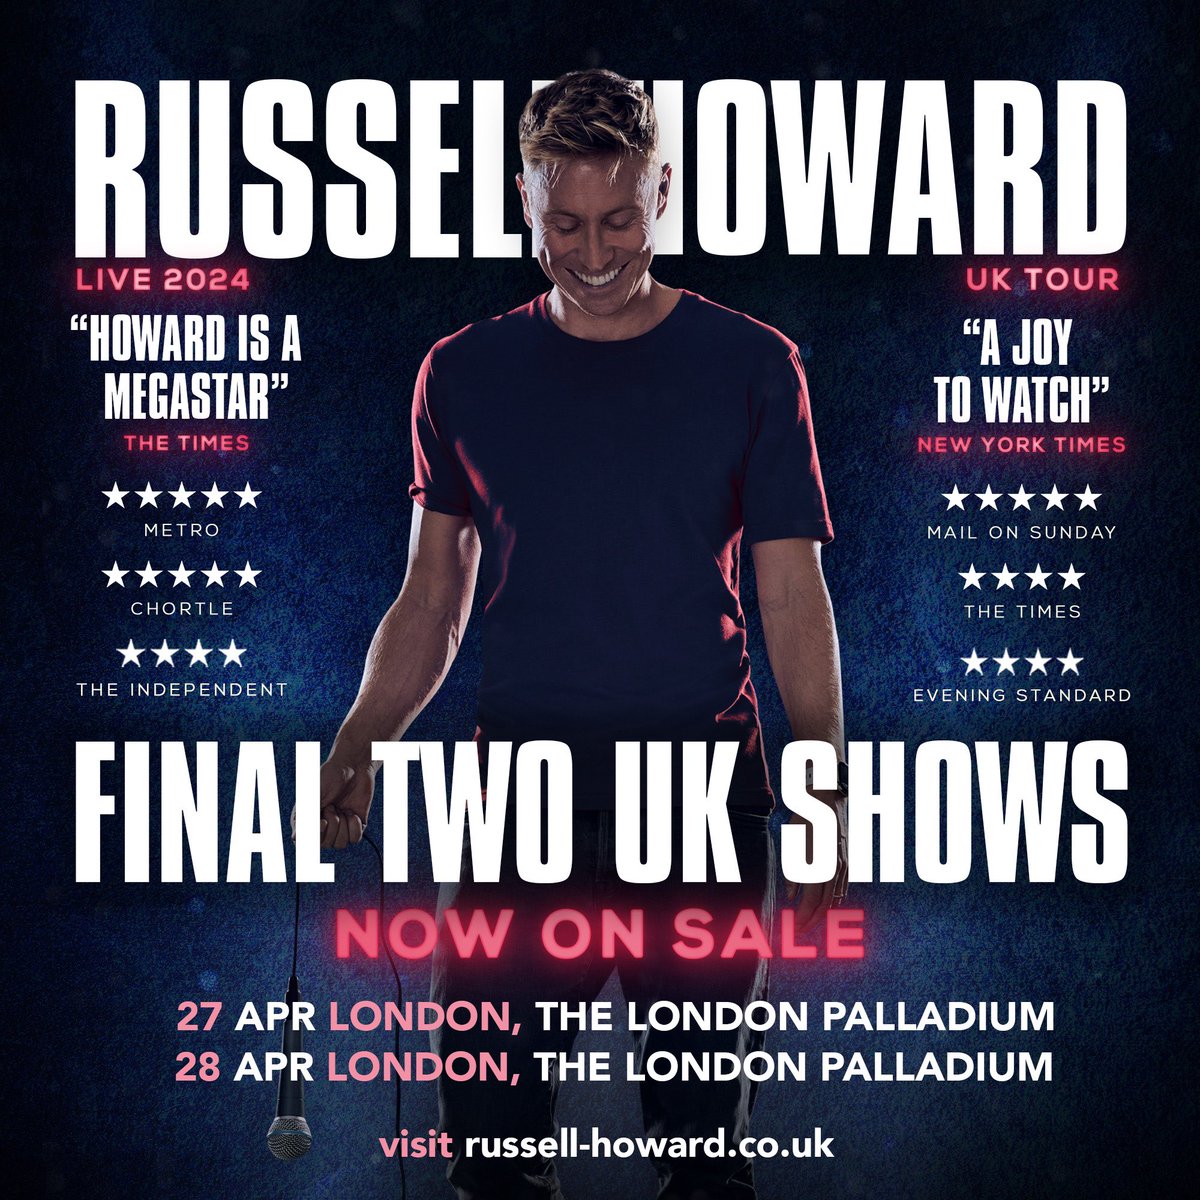 .@russellhoward performs the final two UK shows on his sold-out tour at the @LondonPalladium tonight and tomorrow